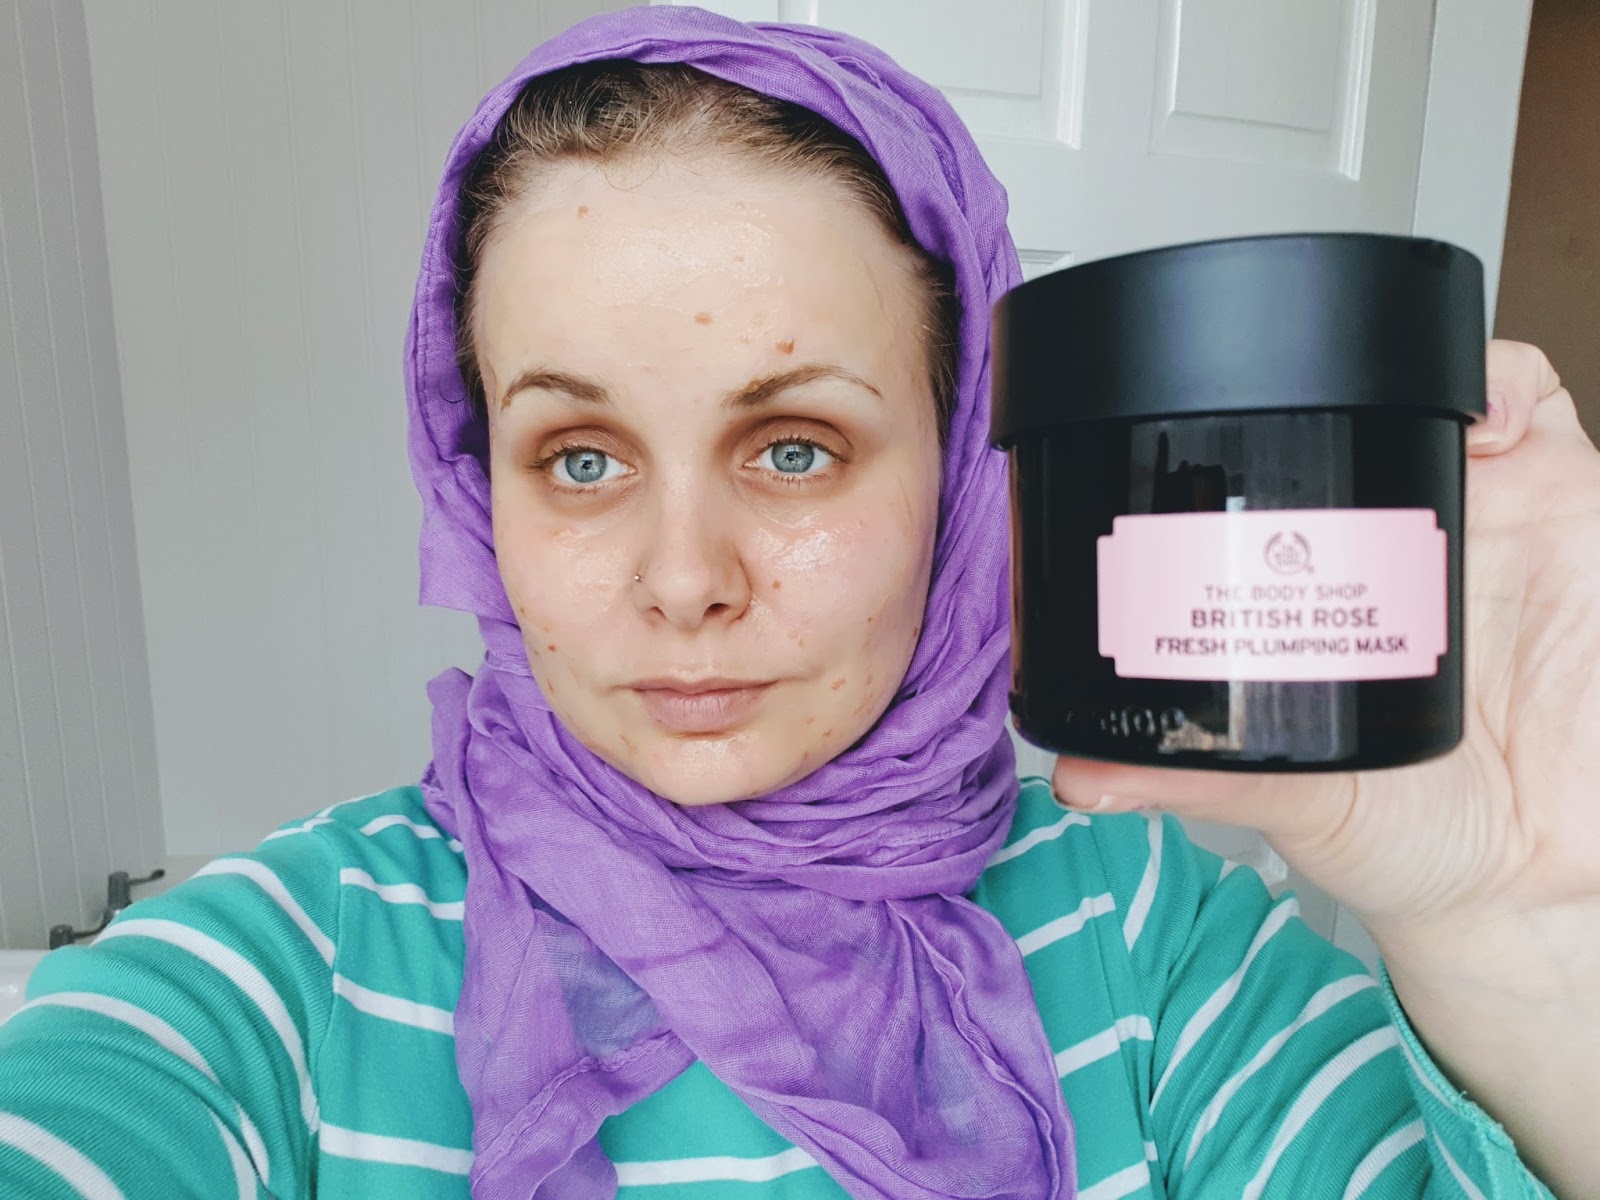 the body shop British rose face mask demo/review 